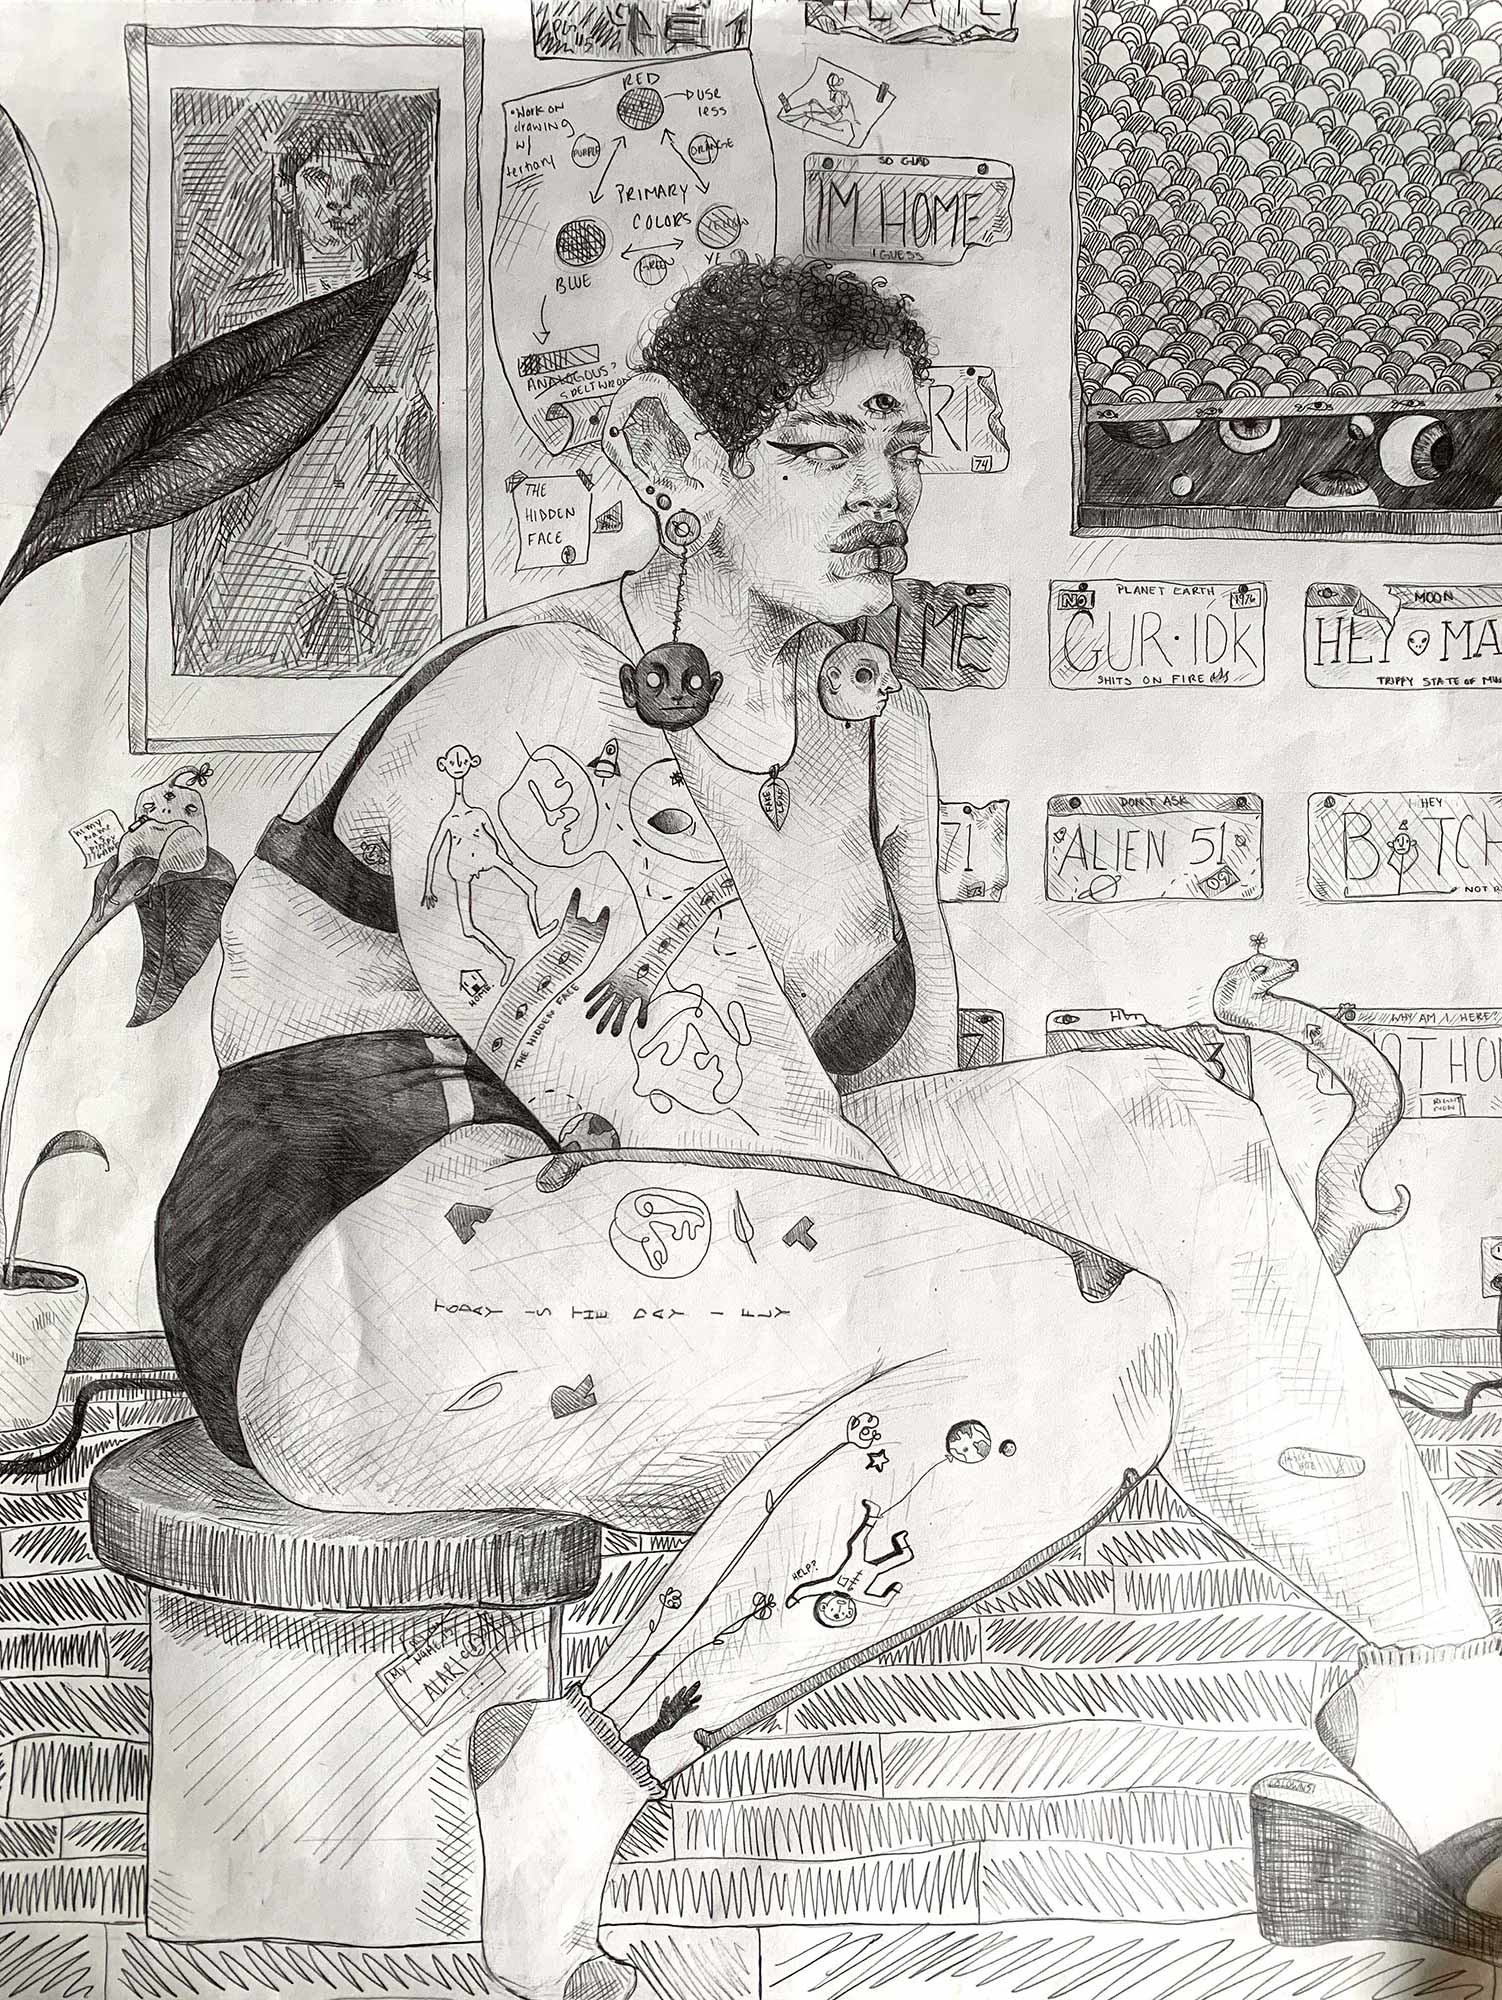 A drawing of a tattooed woman in her home